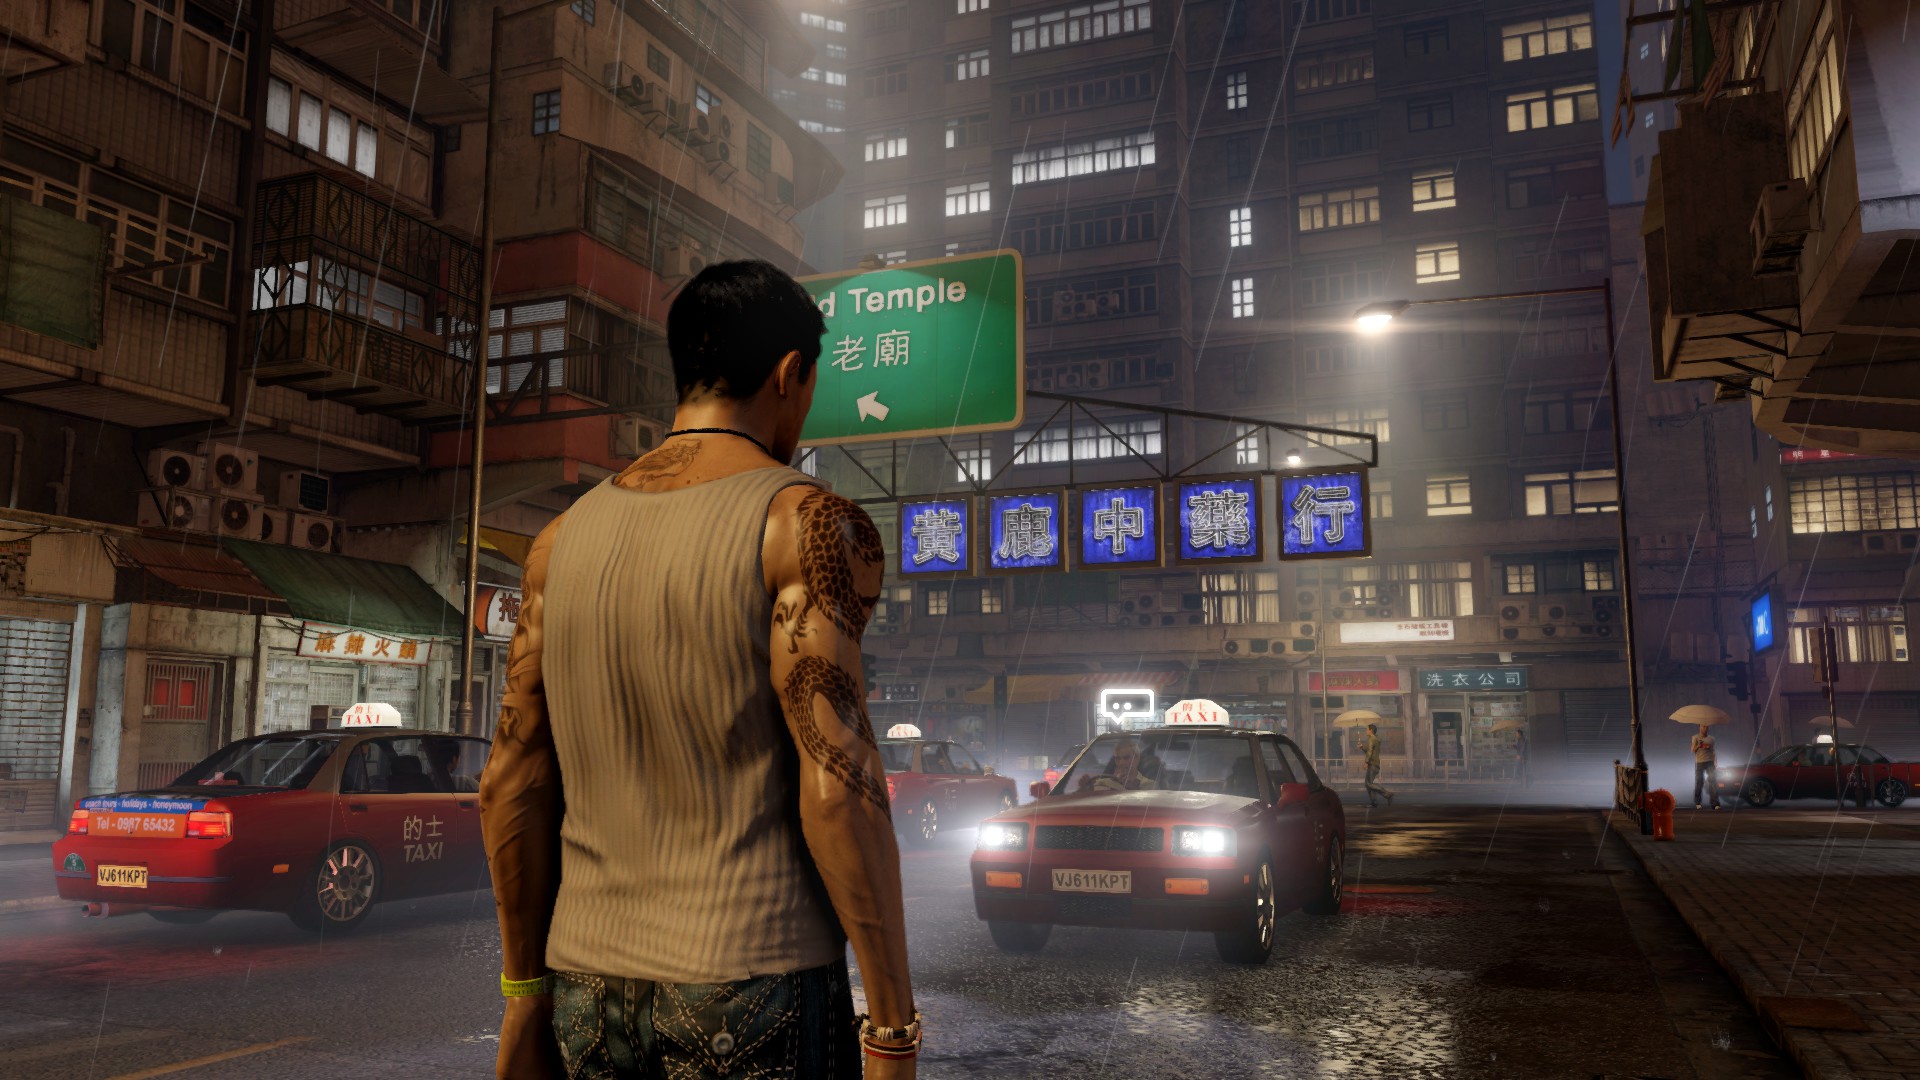 sleeping dogs download pc highly compressed